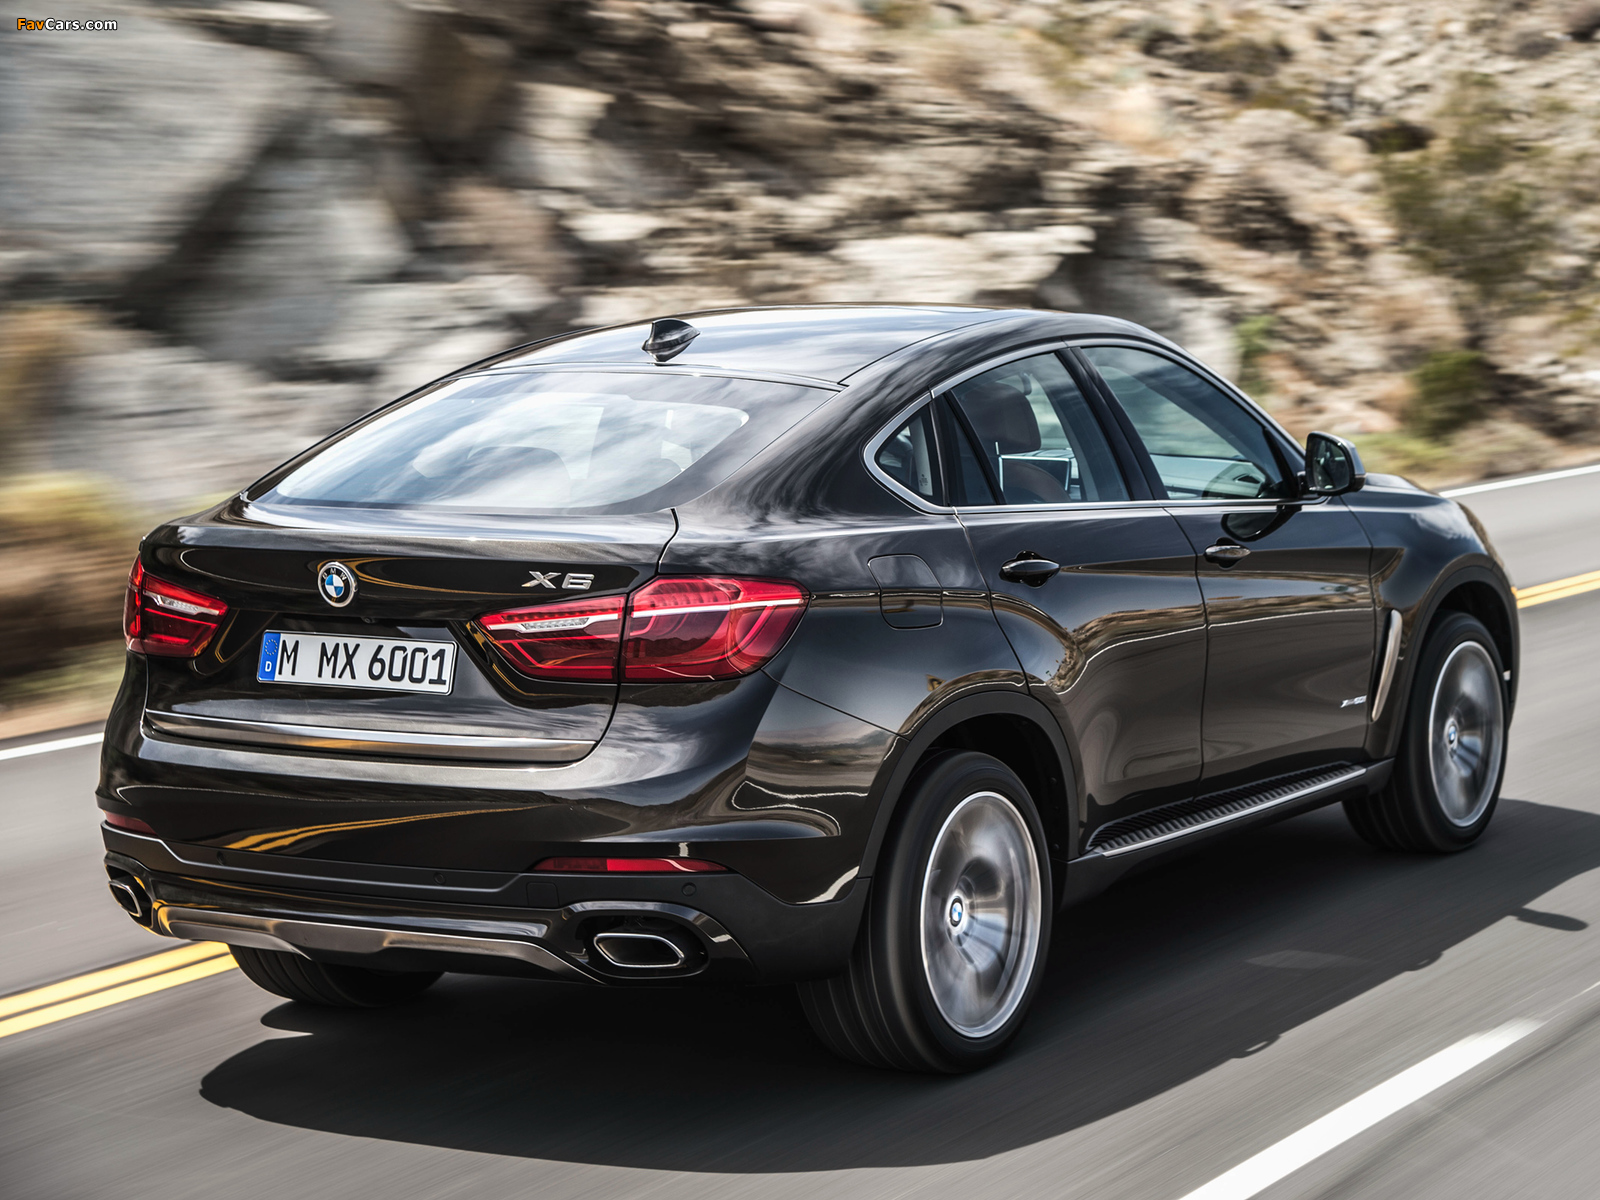 BMW X6 xDrive50i (F16) 2014 pictures (1600 x 1200)